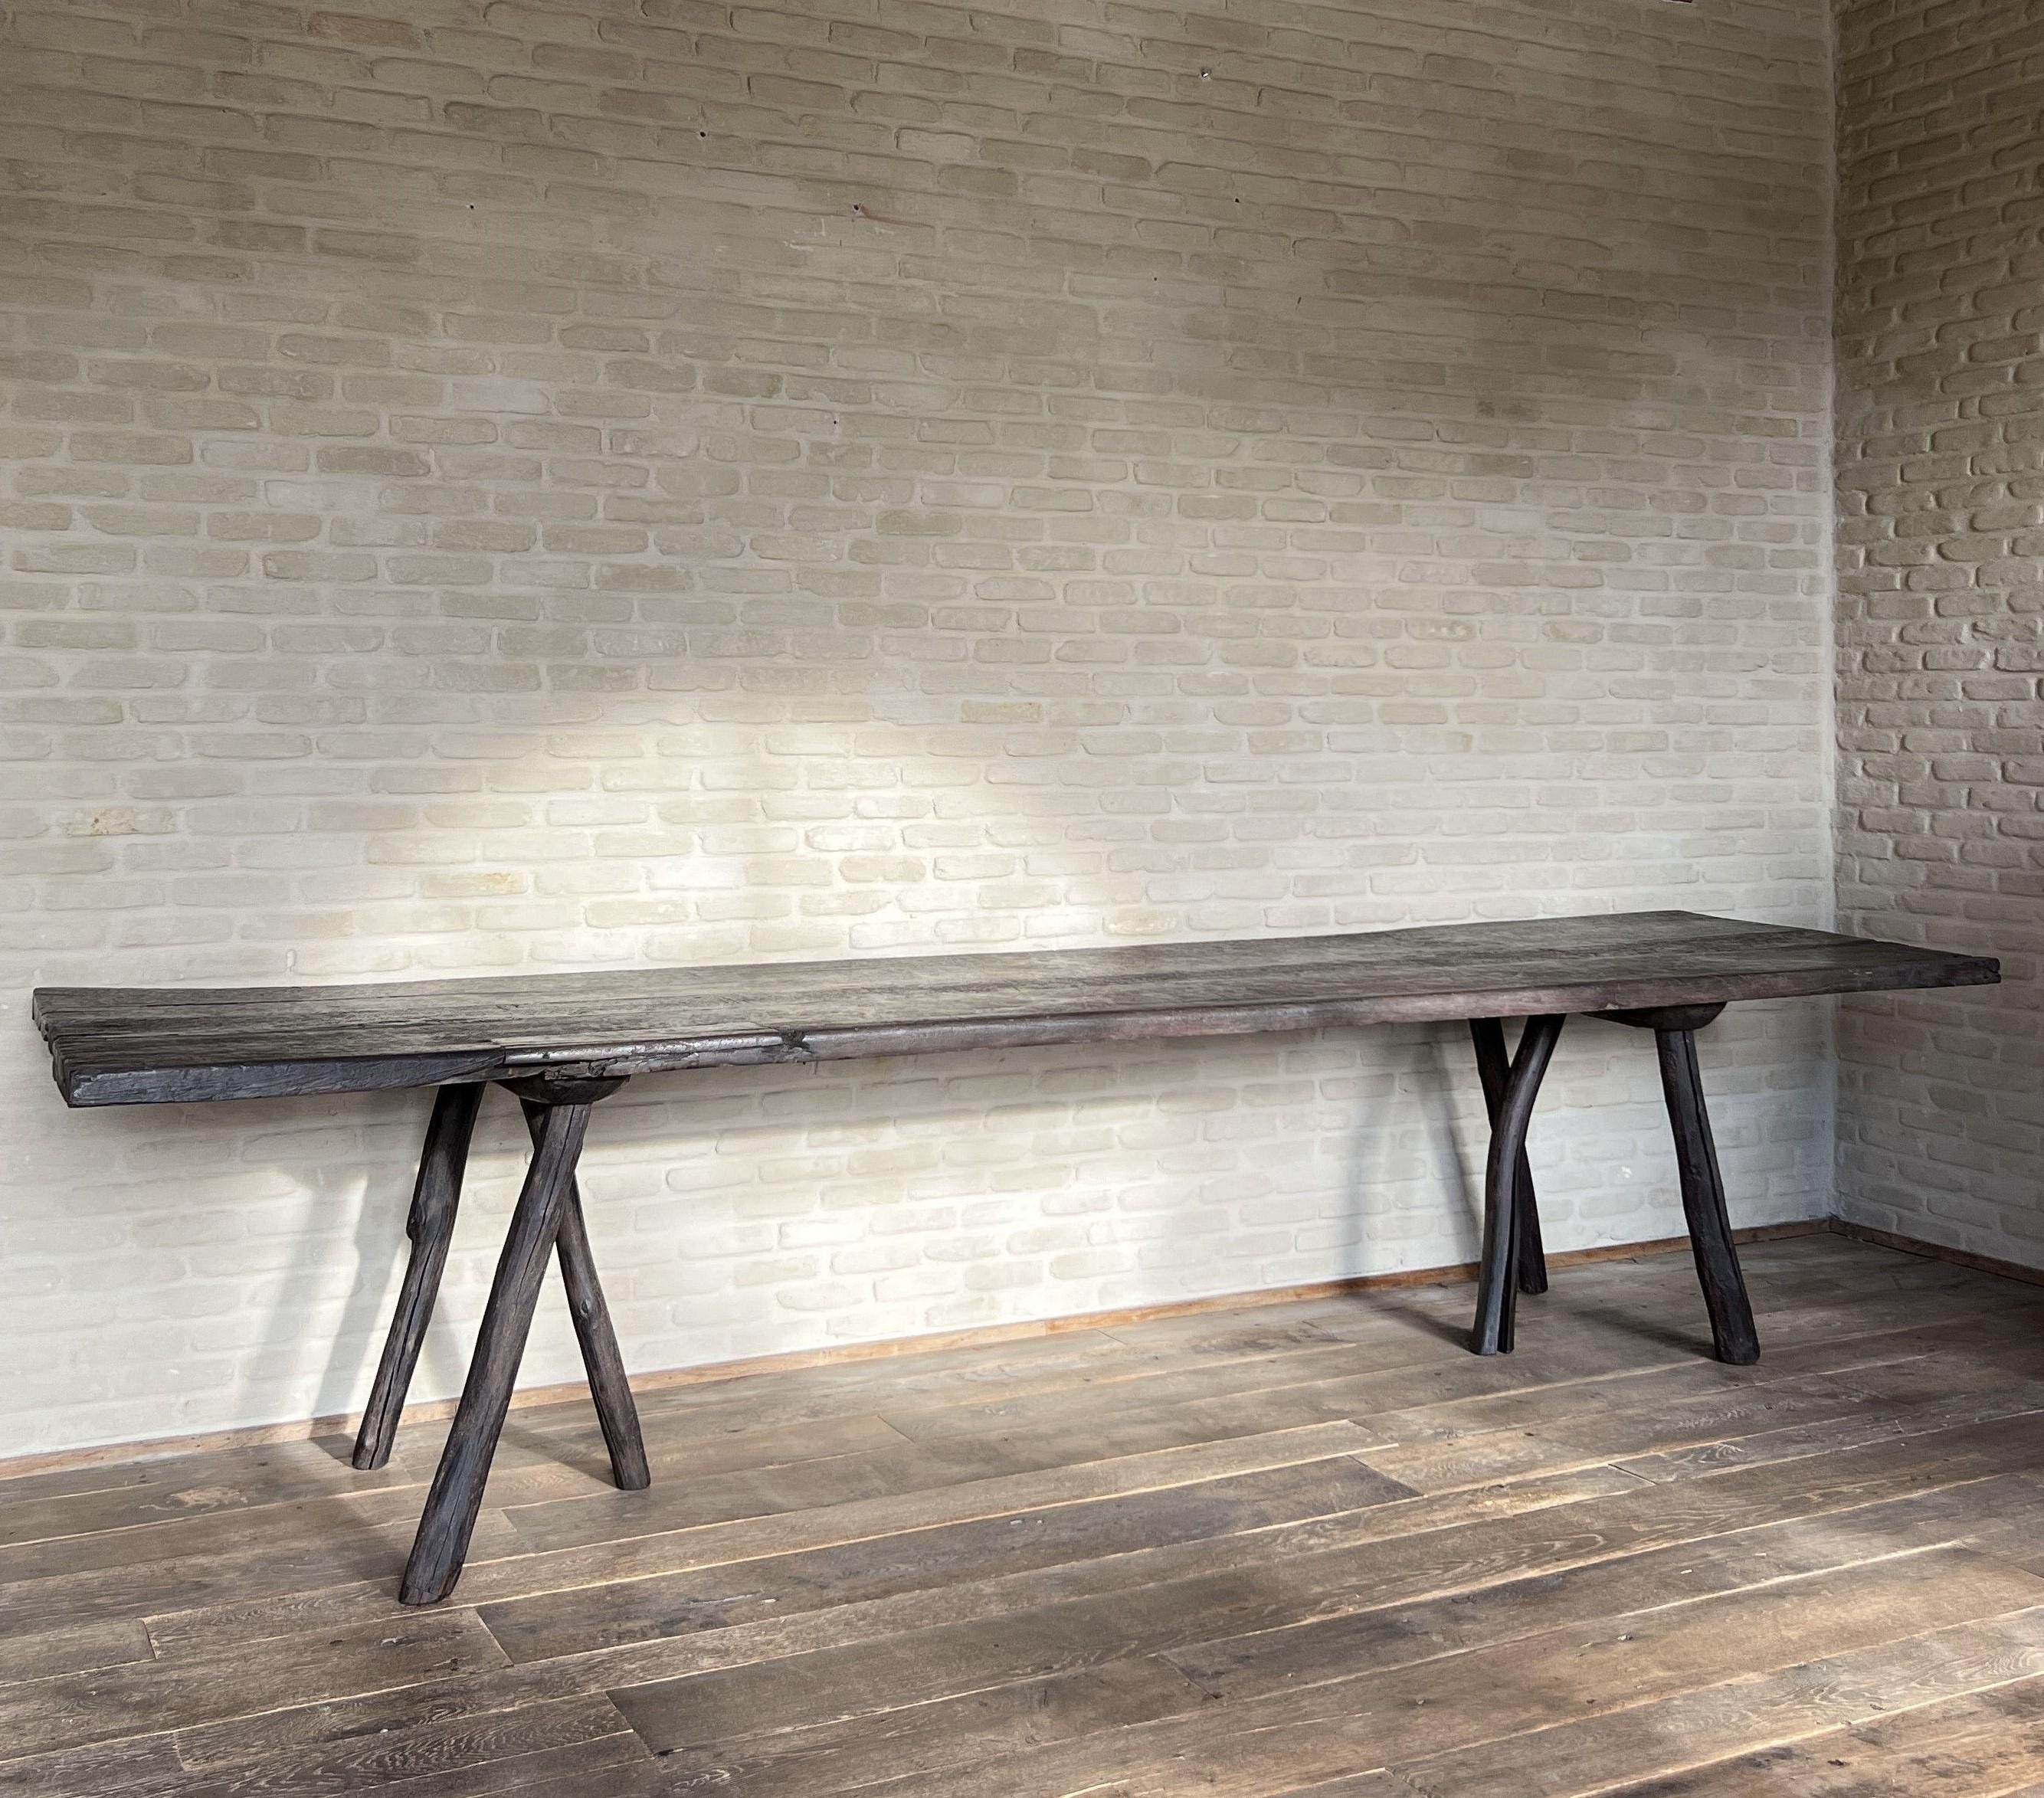 We made this table starting from a 19th century hardwood 3 plank top. Inspired by brutalism, organic furniture and 16th century refectory tables we decided to add tripod feet made from reclaimed early 20th century fencing posts. All the time